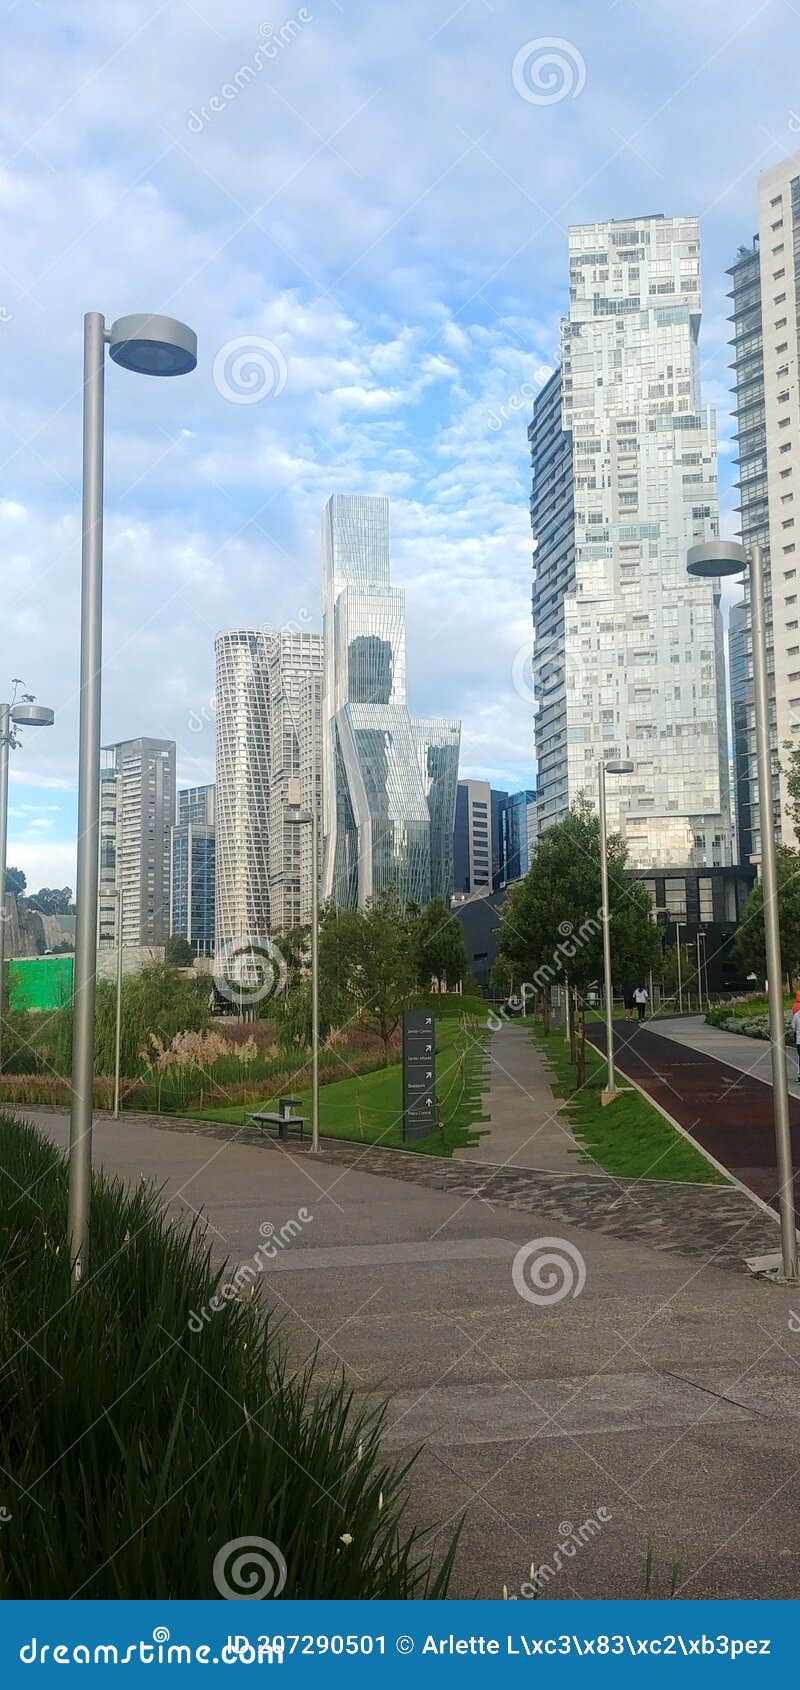 urban landscape with park and buildings modern architecture in the background